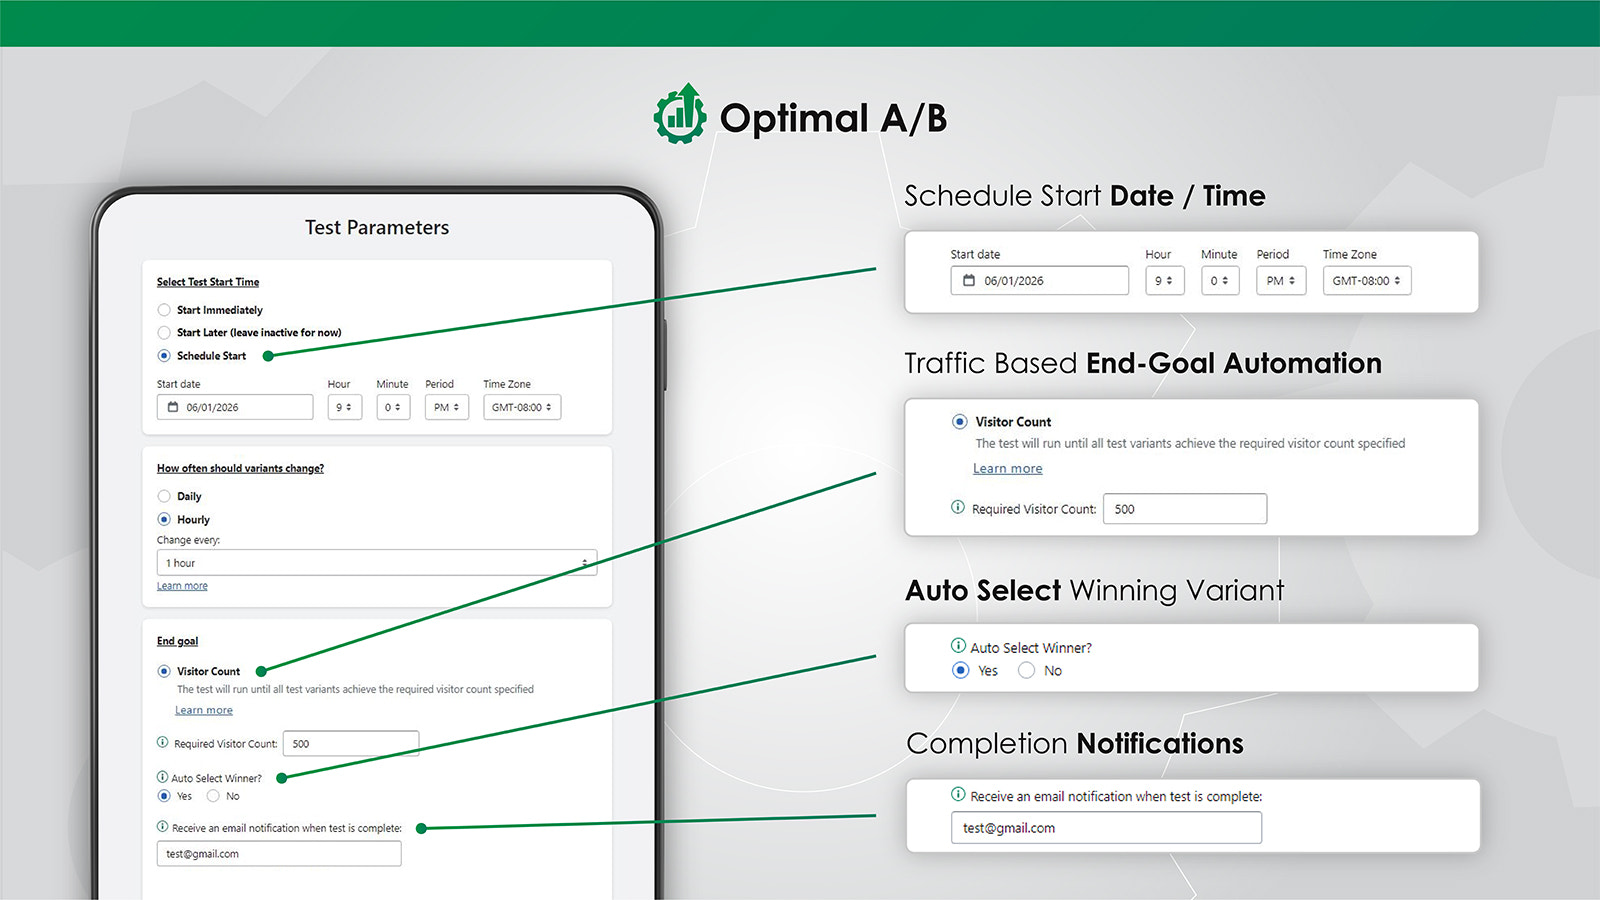 Optimal A/B Testing has automation and scheduling features